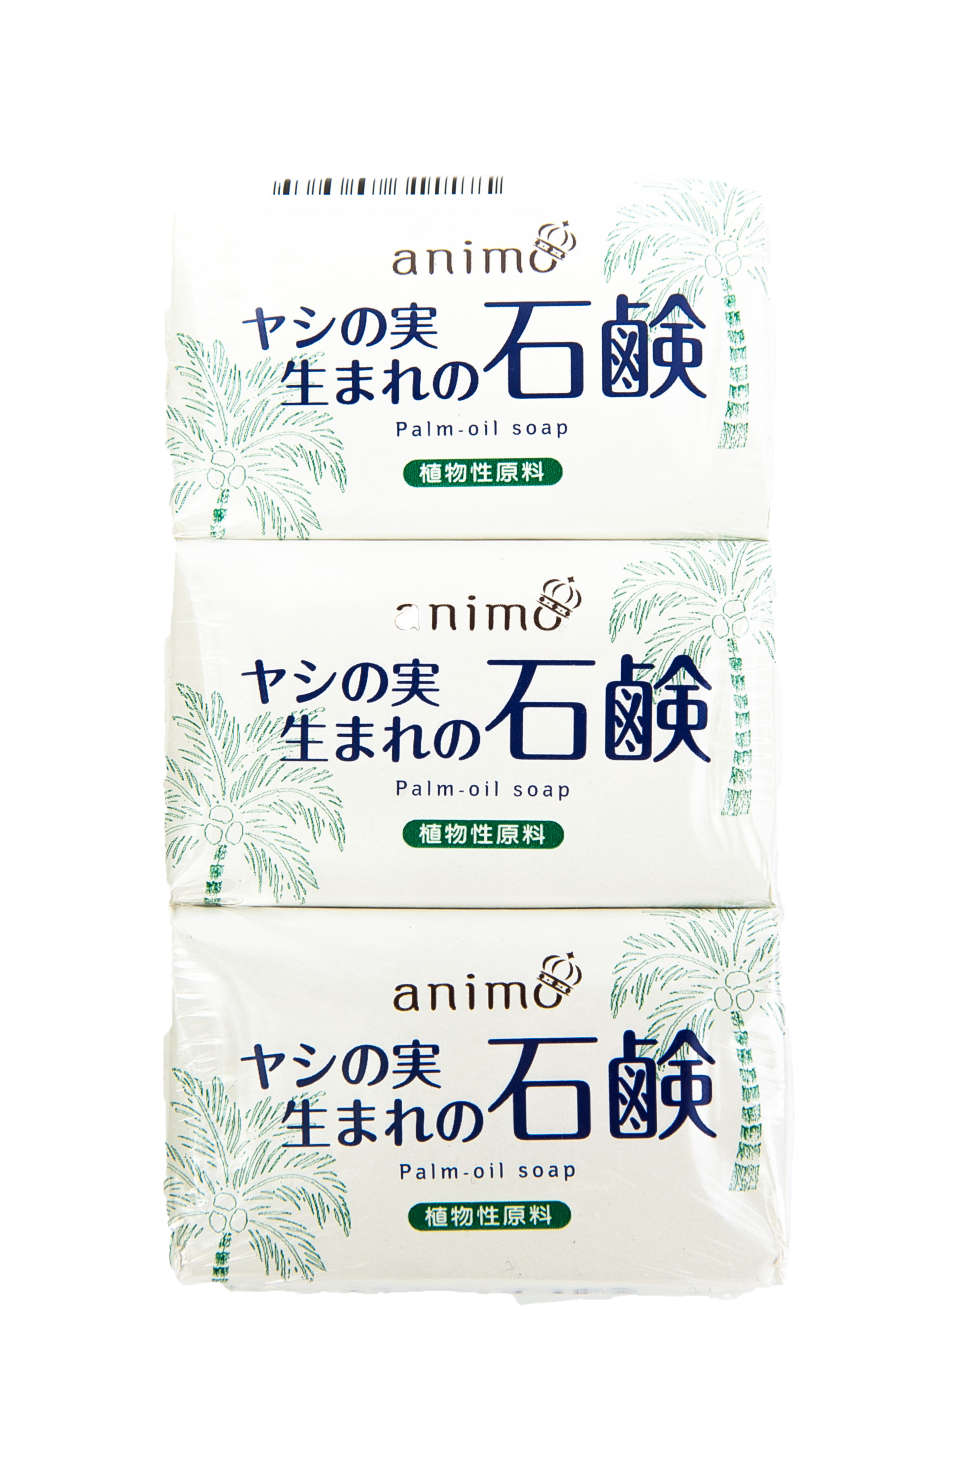 RS AMINO hand soap with palm oil 3 bars*80g 